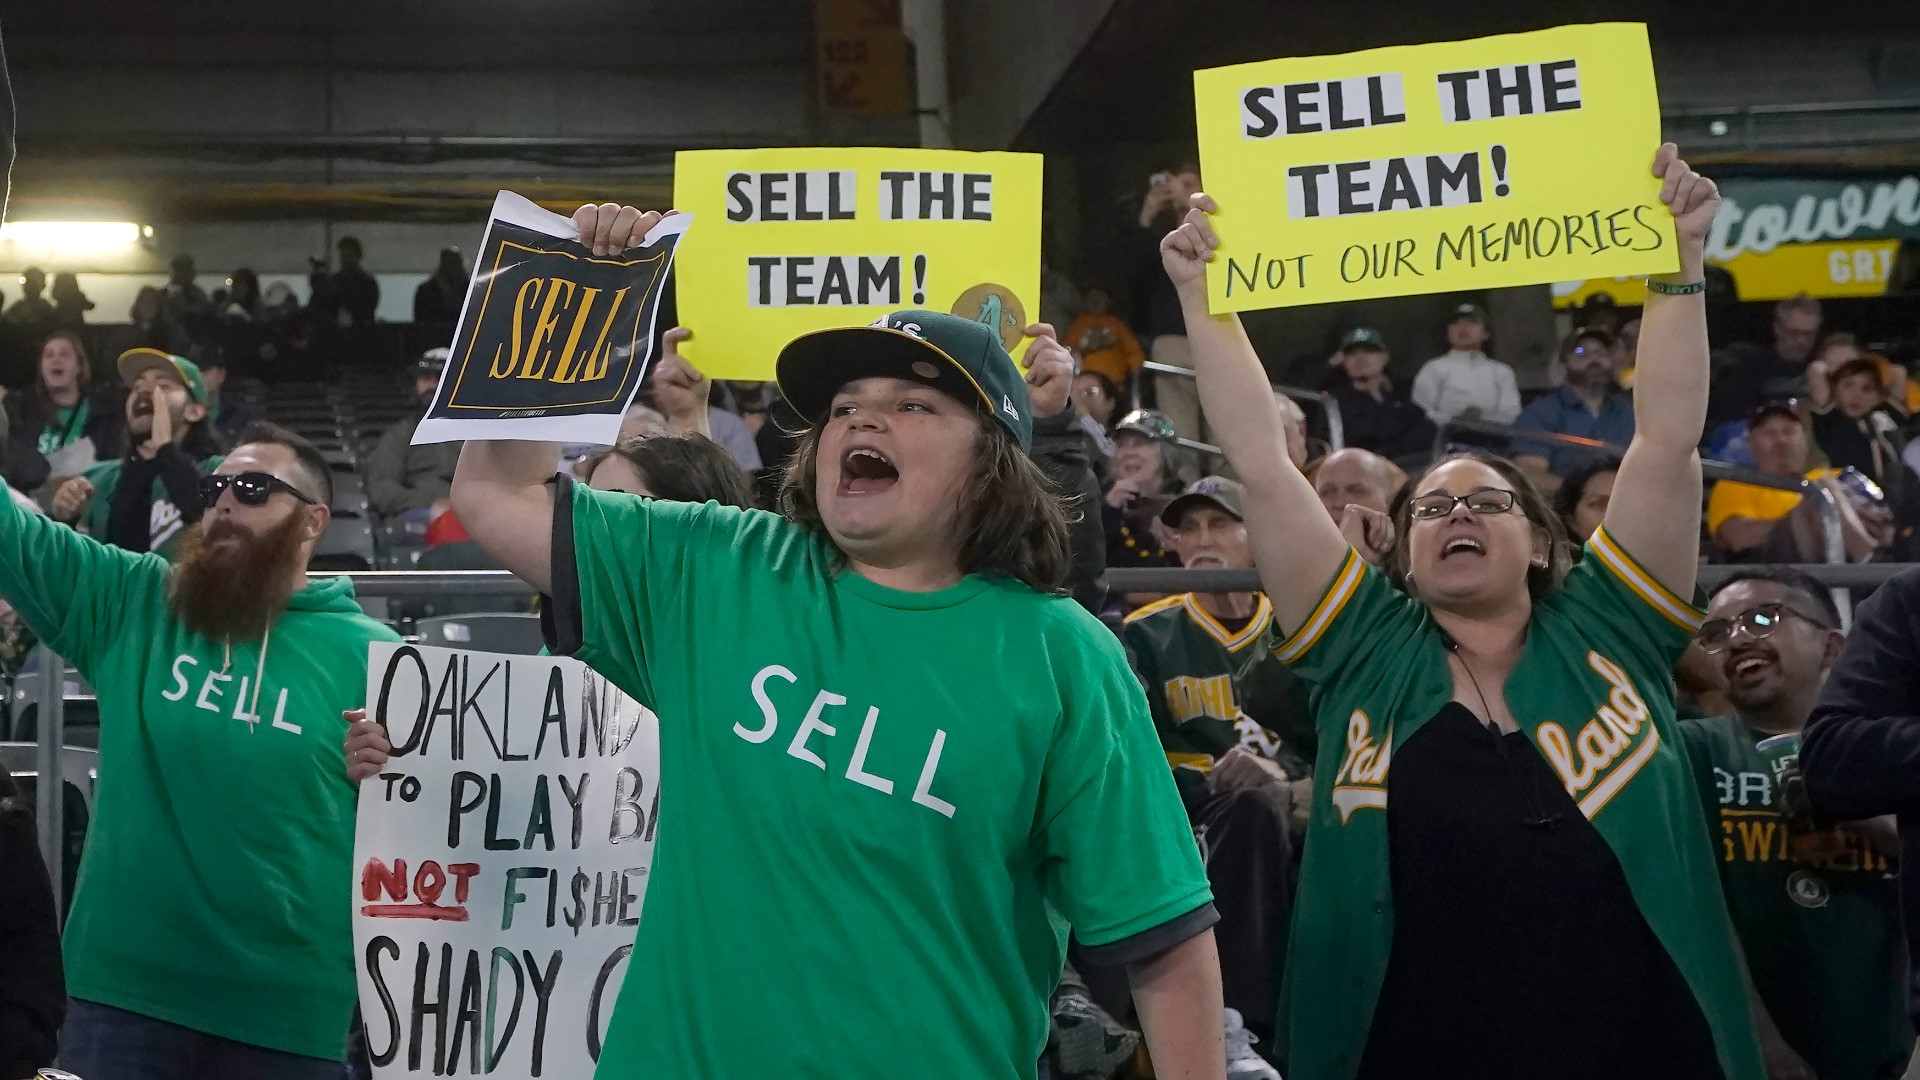 The Oakland Athletics have reached an agreement with Bally’s and Gaming & Leisure Properties to build a potential stadium on the Tropicana hotel site